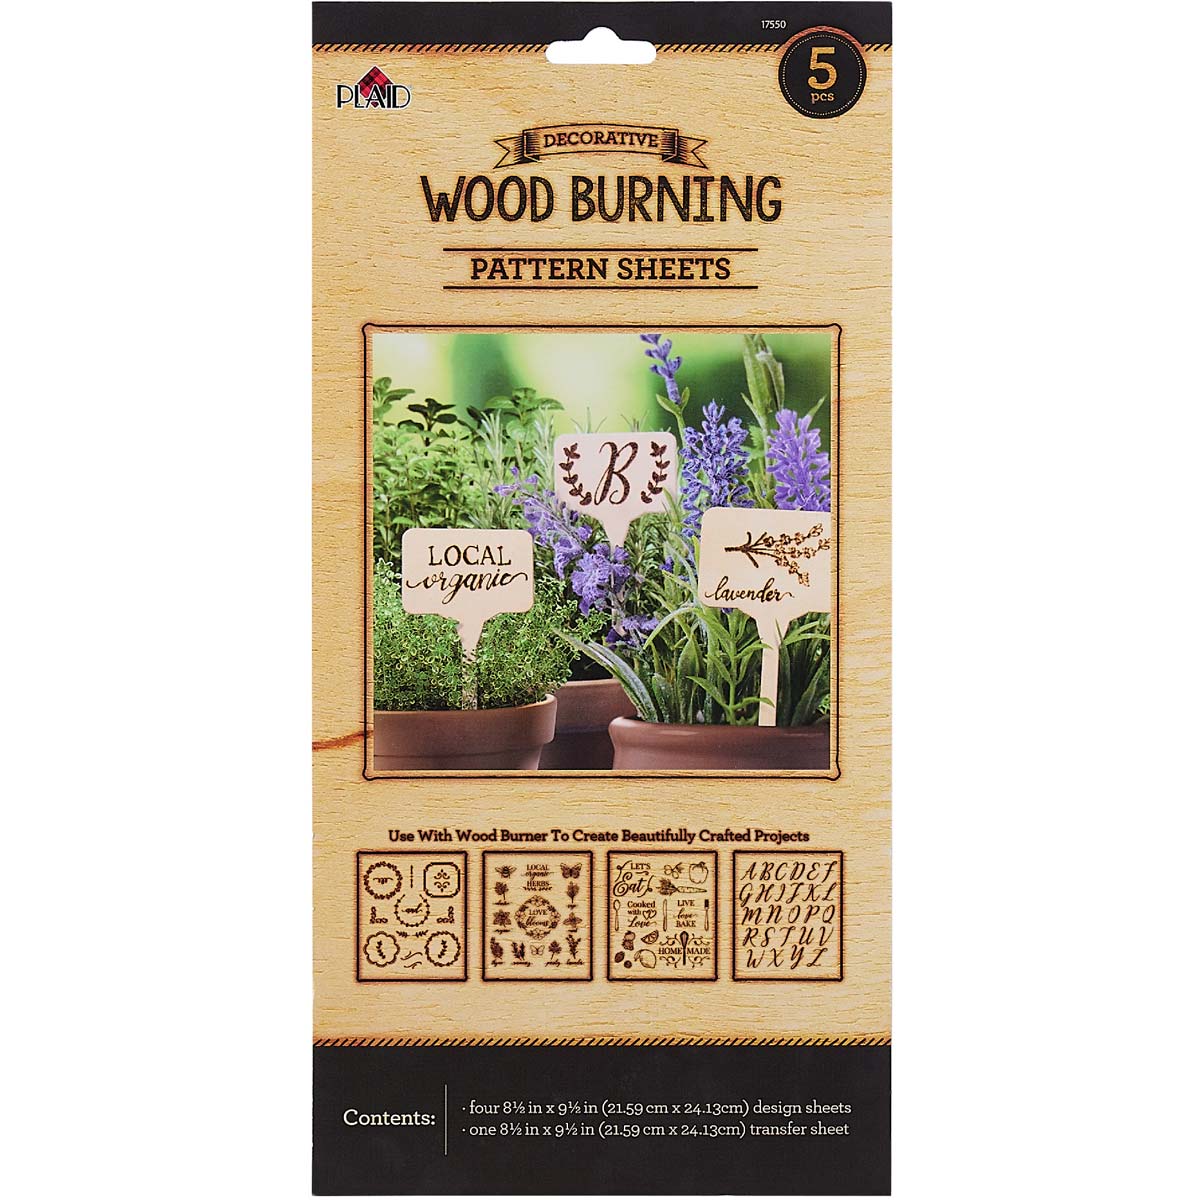 Plaid ® Wood Burning Pattern Sheets - Outdoor, 5 pc. - 17550